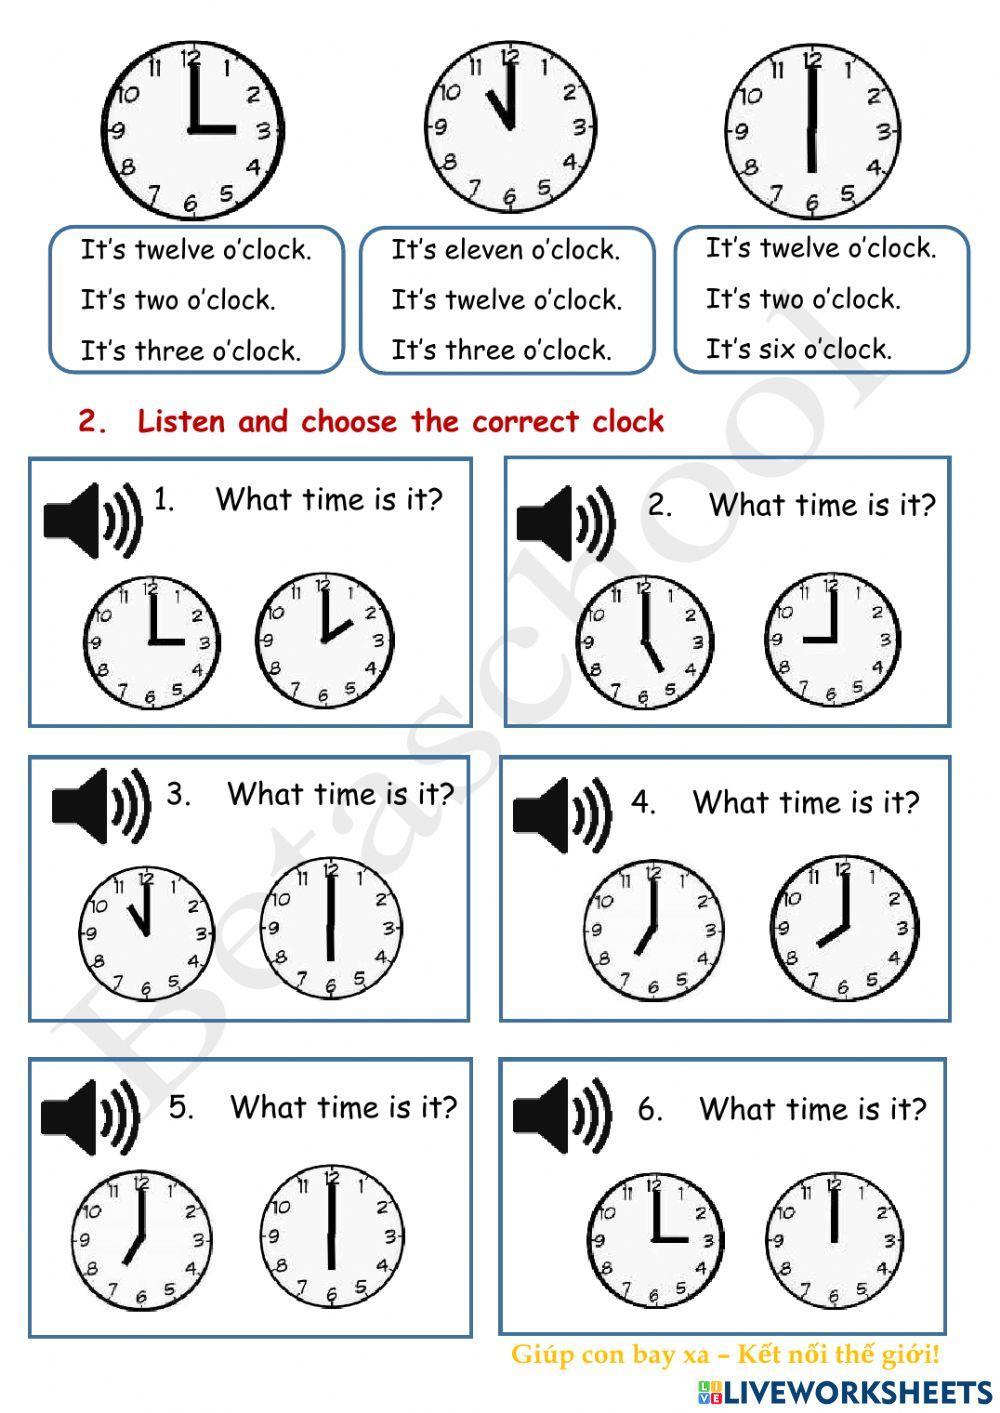 BE1A - What time is it? - TOPIC 5